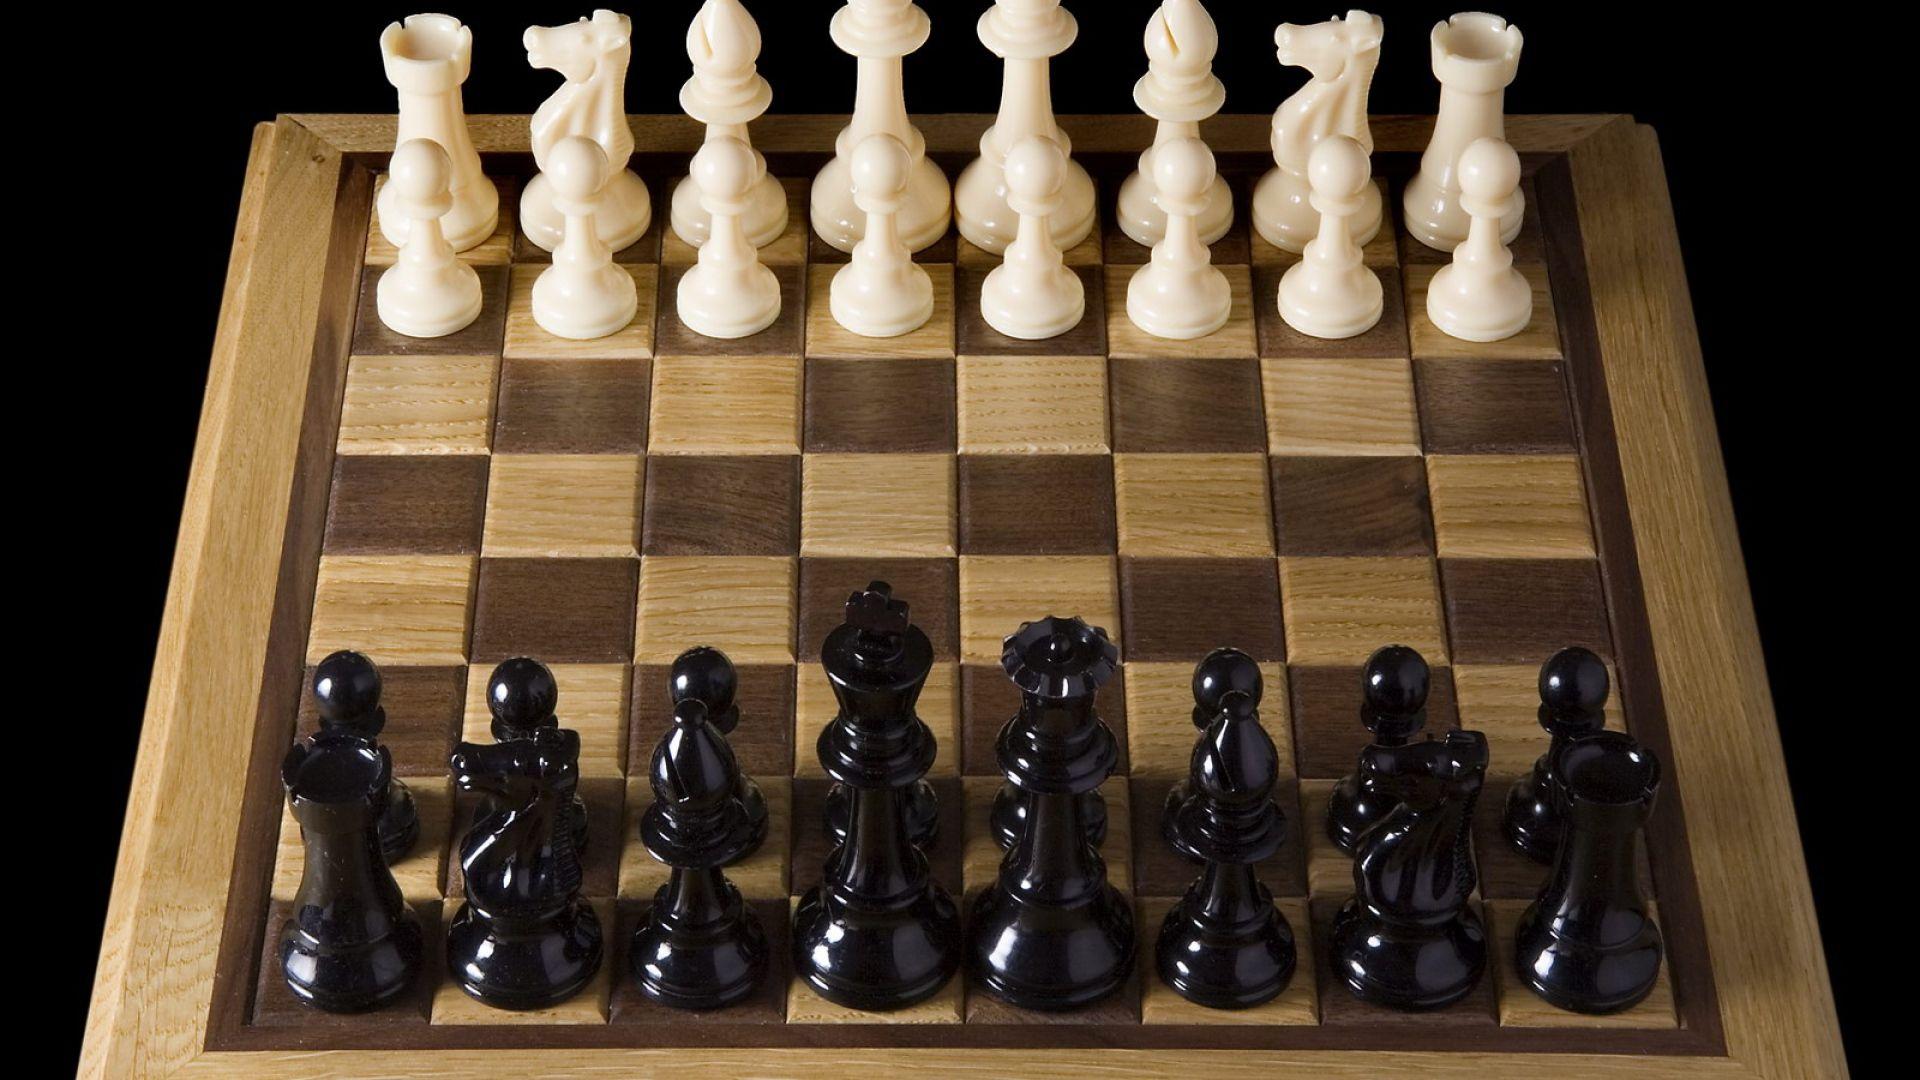 Download Wallpaper 1920x1080 board, game, chess, party, figures